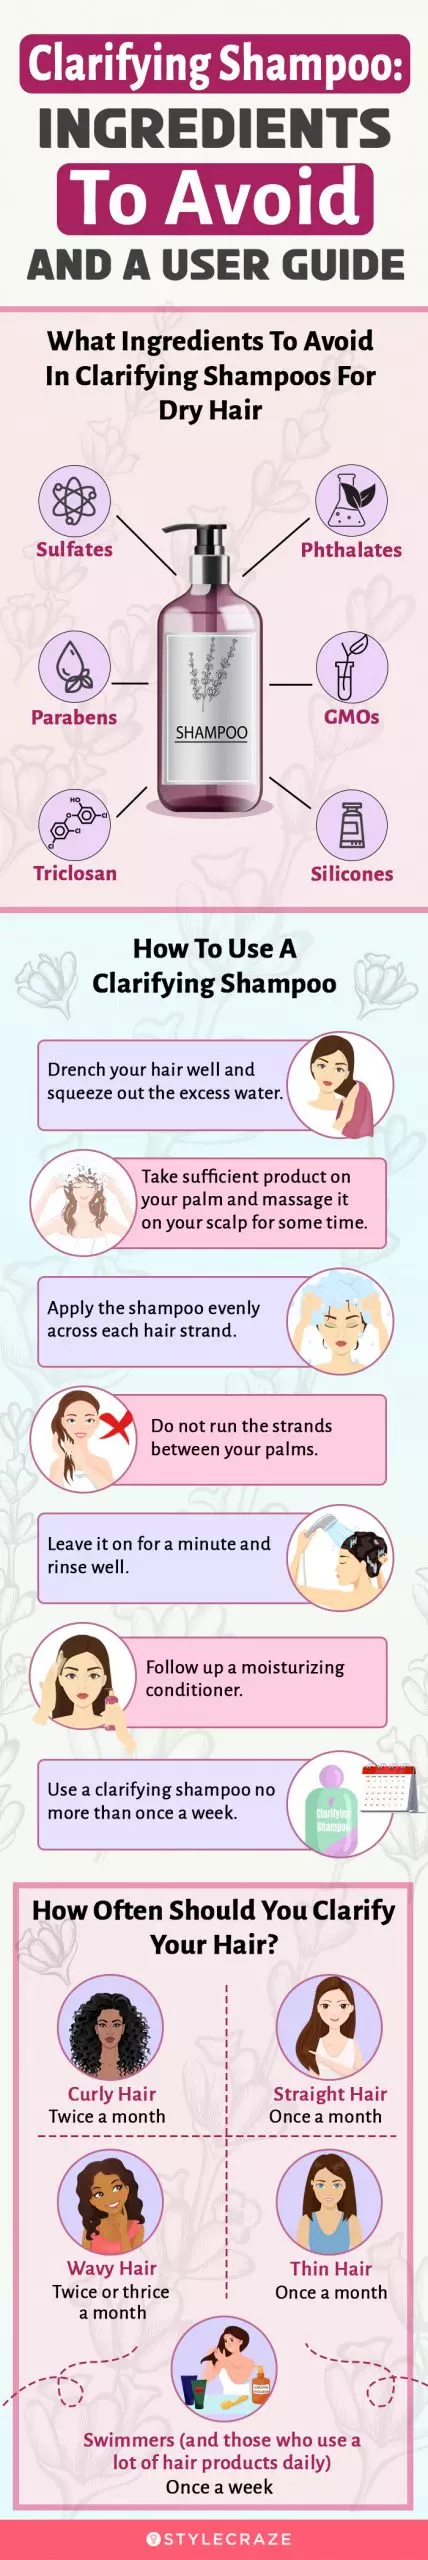 Clarifying Shampoo: Ingredients To Avoid And A User Guide (infographic)